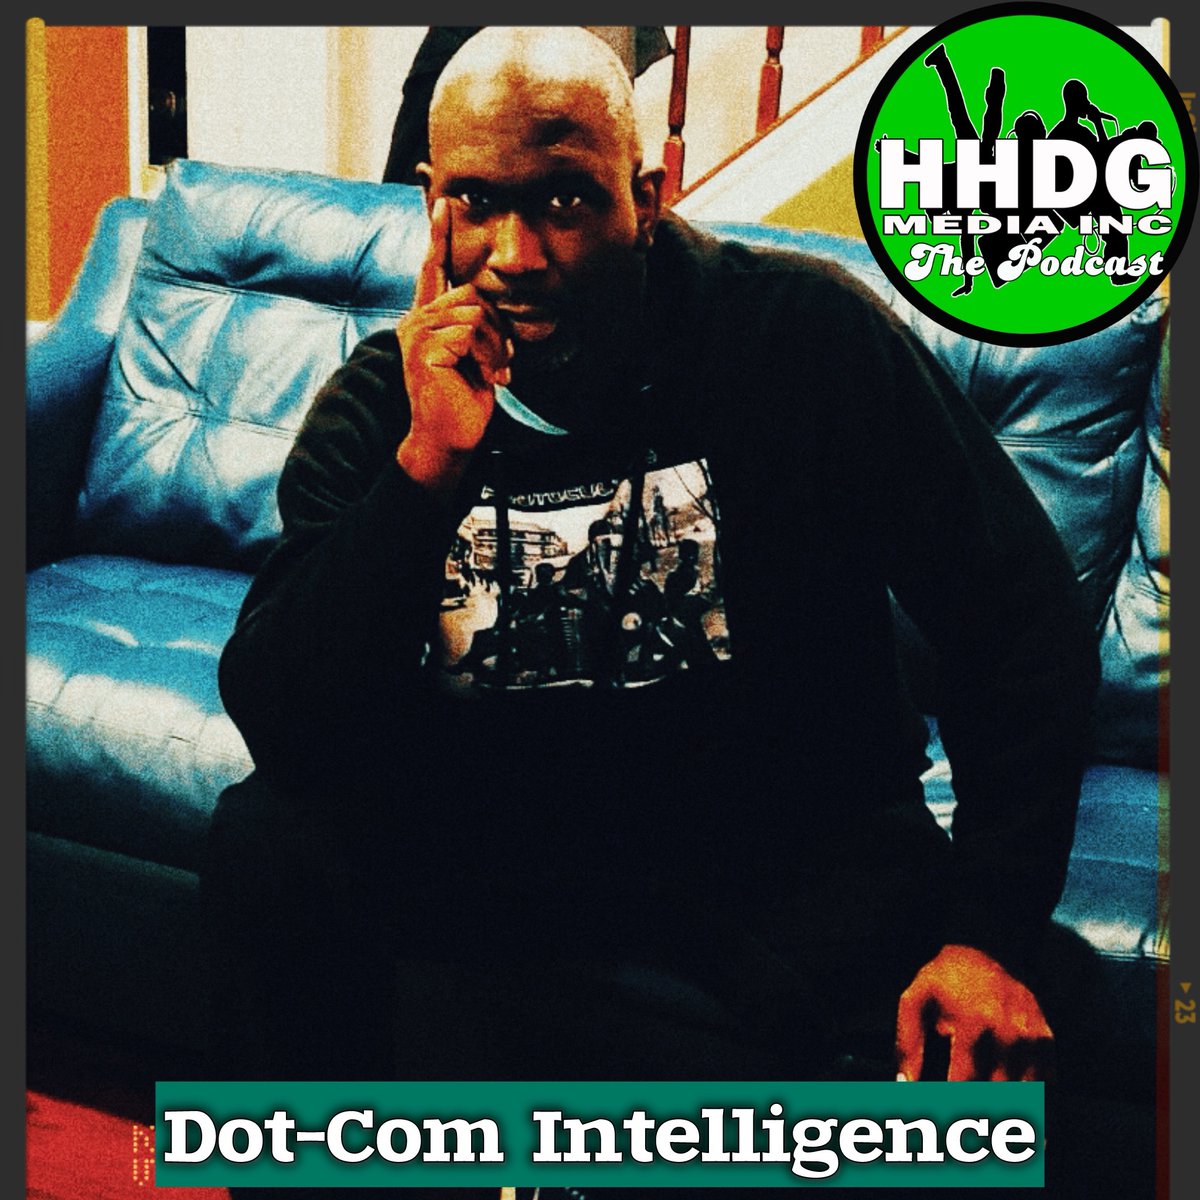 TONIGHT 3/27/24 AT 9PM EST ON @HHDGMediaInc THE PODCAST OUR GUEST IS @Dotintell19

WATCH & COMMENT LIVE VIA YOUTUBE youtube.com/live/S9662oIkg…

 #HHDGMEDIAINC #DOTCOMINTELLIGENCE #INTERVIEW #PODCAST #PRODUCER #IAMNOTYOURNEGRO #EMCEE #PGCOUNTY #MEDIA #XDECADE #HIPHOP #WIKIHHDG